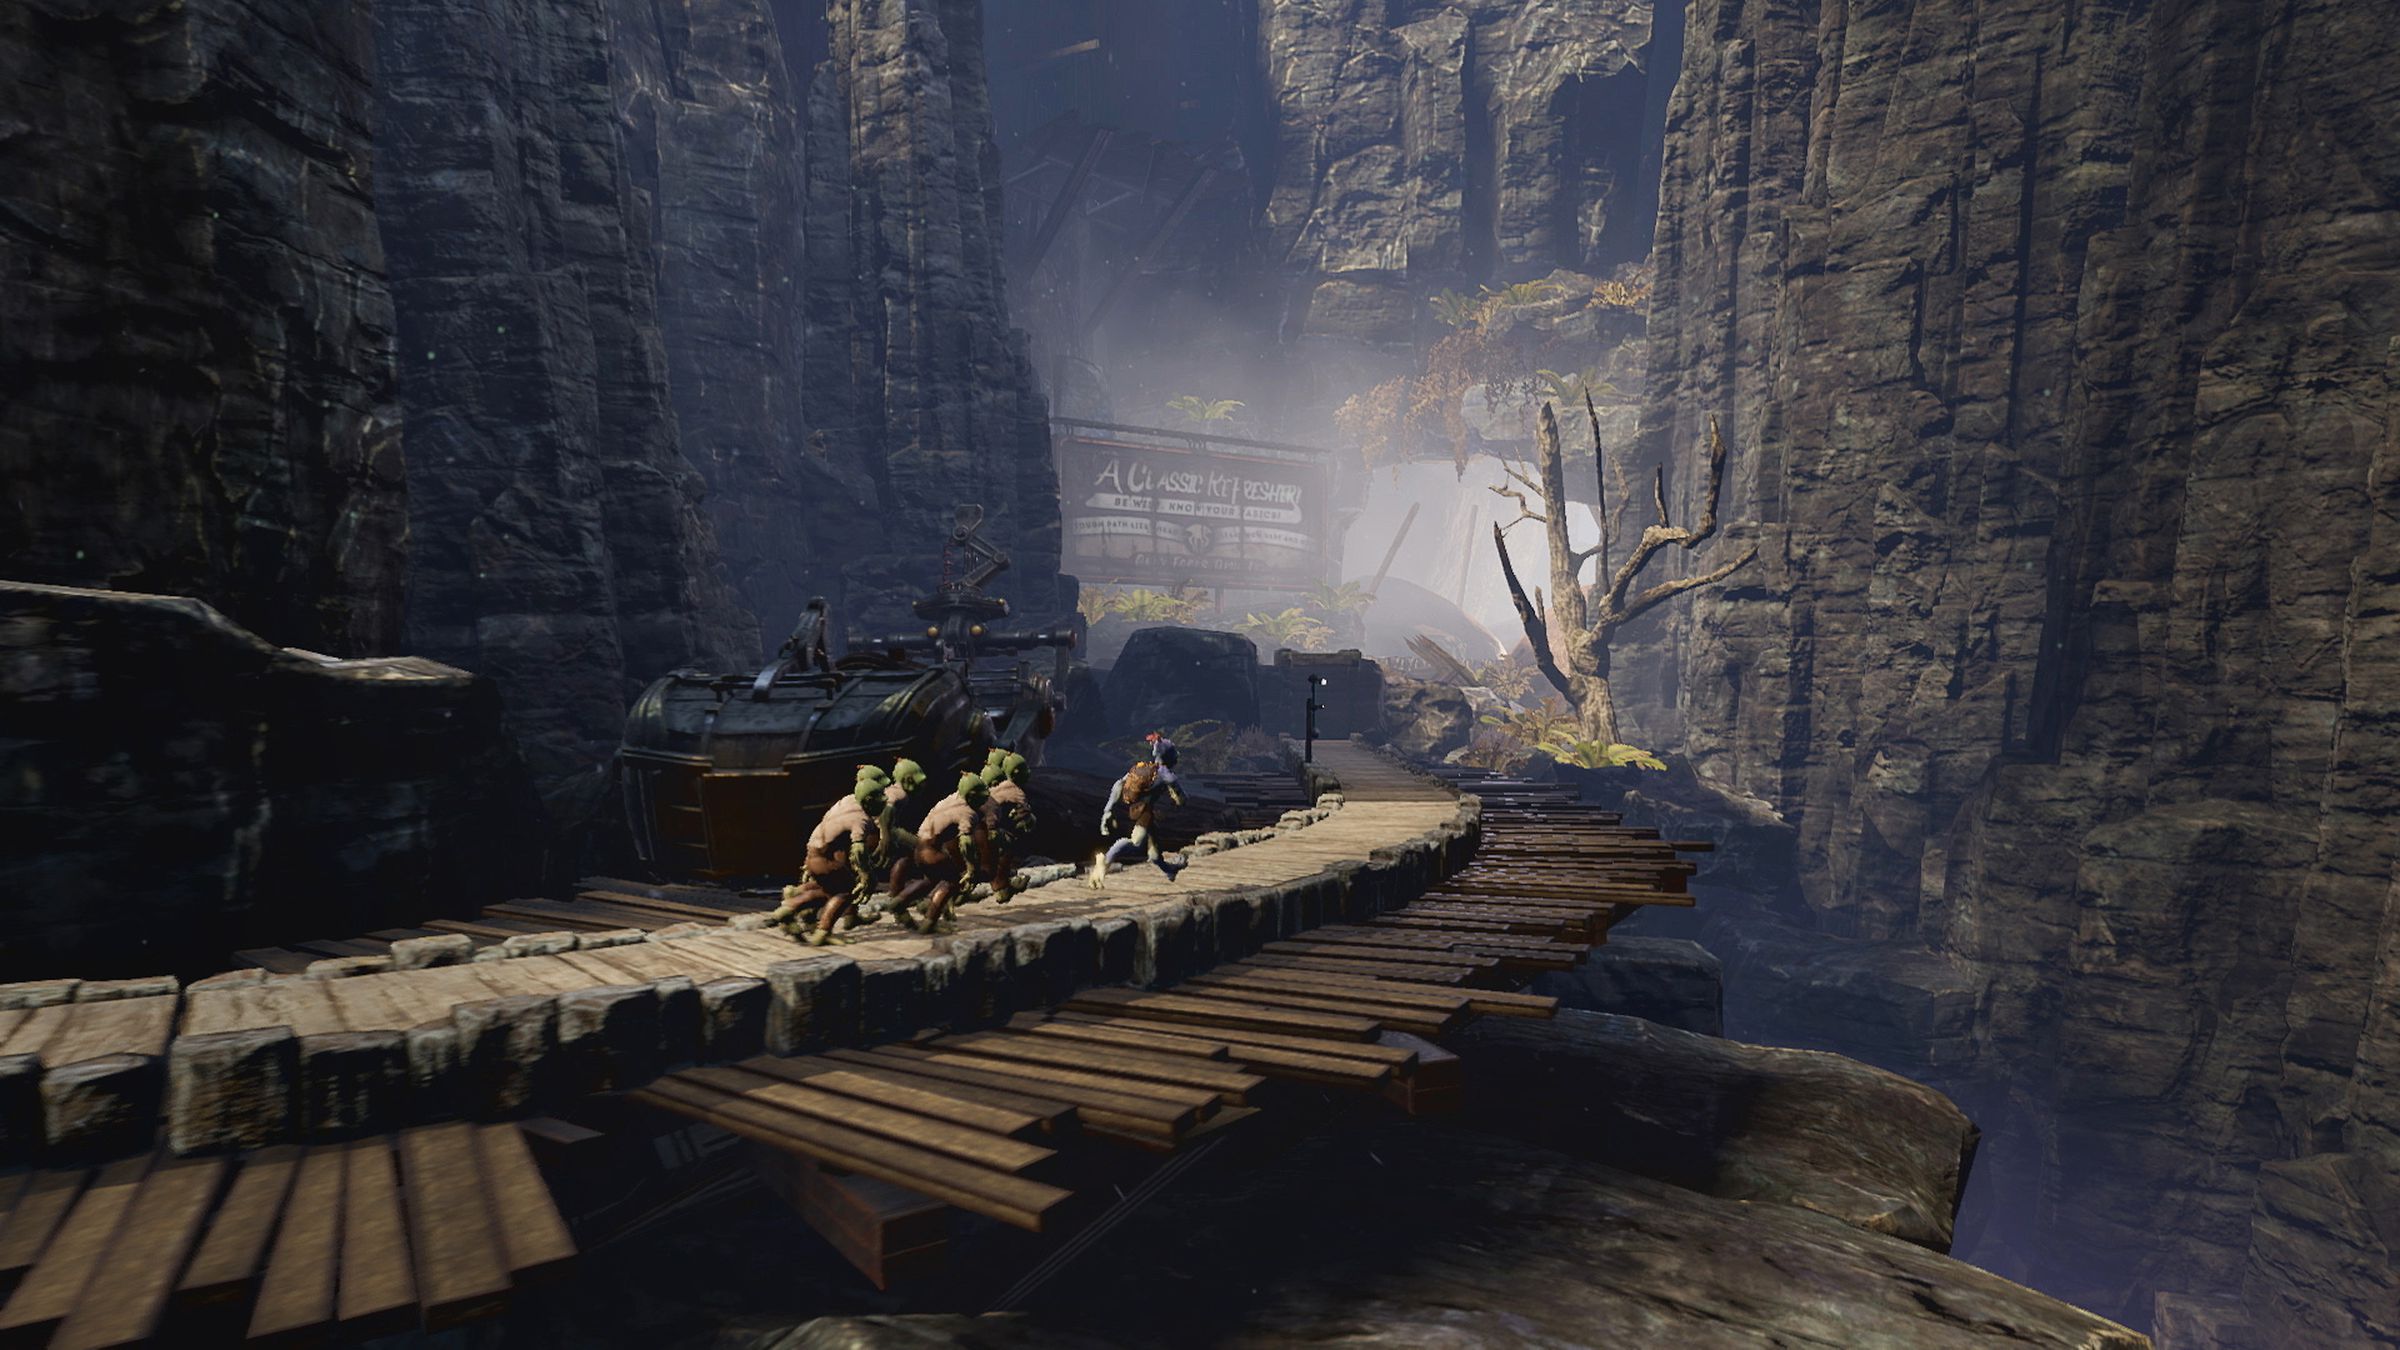 Screenshot from Oddworld: Soulstorm in which a blue skinned bulbous headed alien named Abe leads his fellow green-skinned mudokons out of a lush canyon to freedom